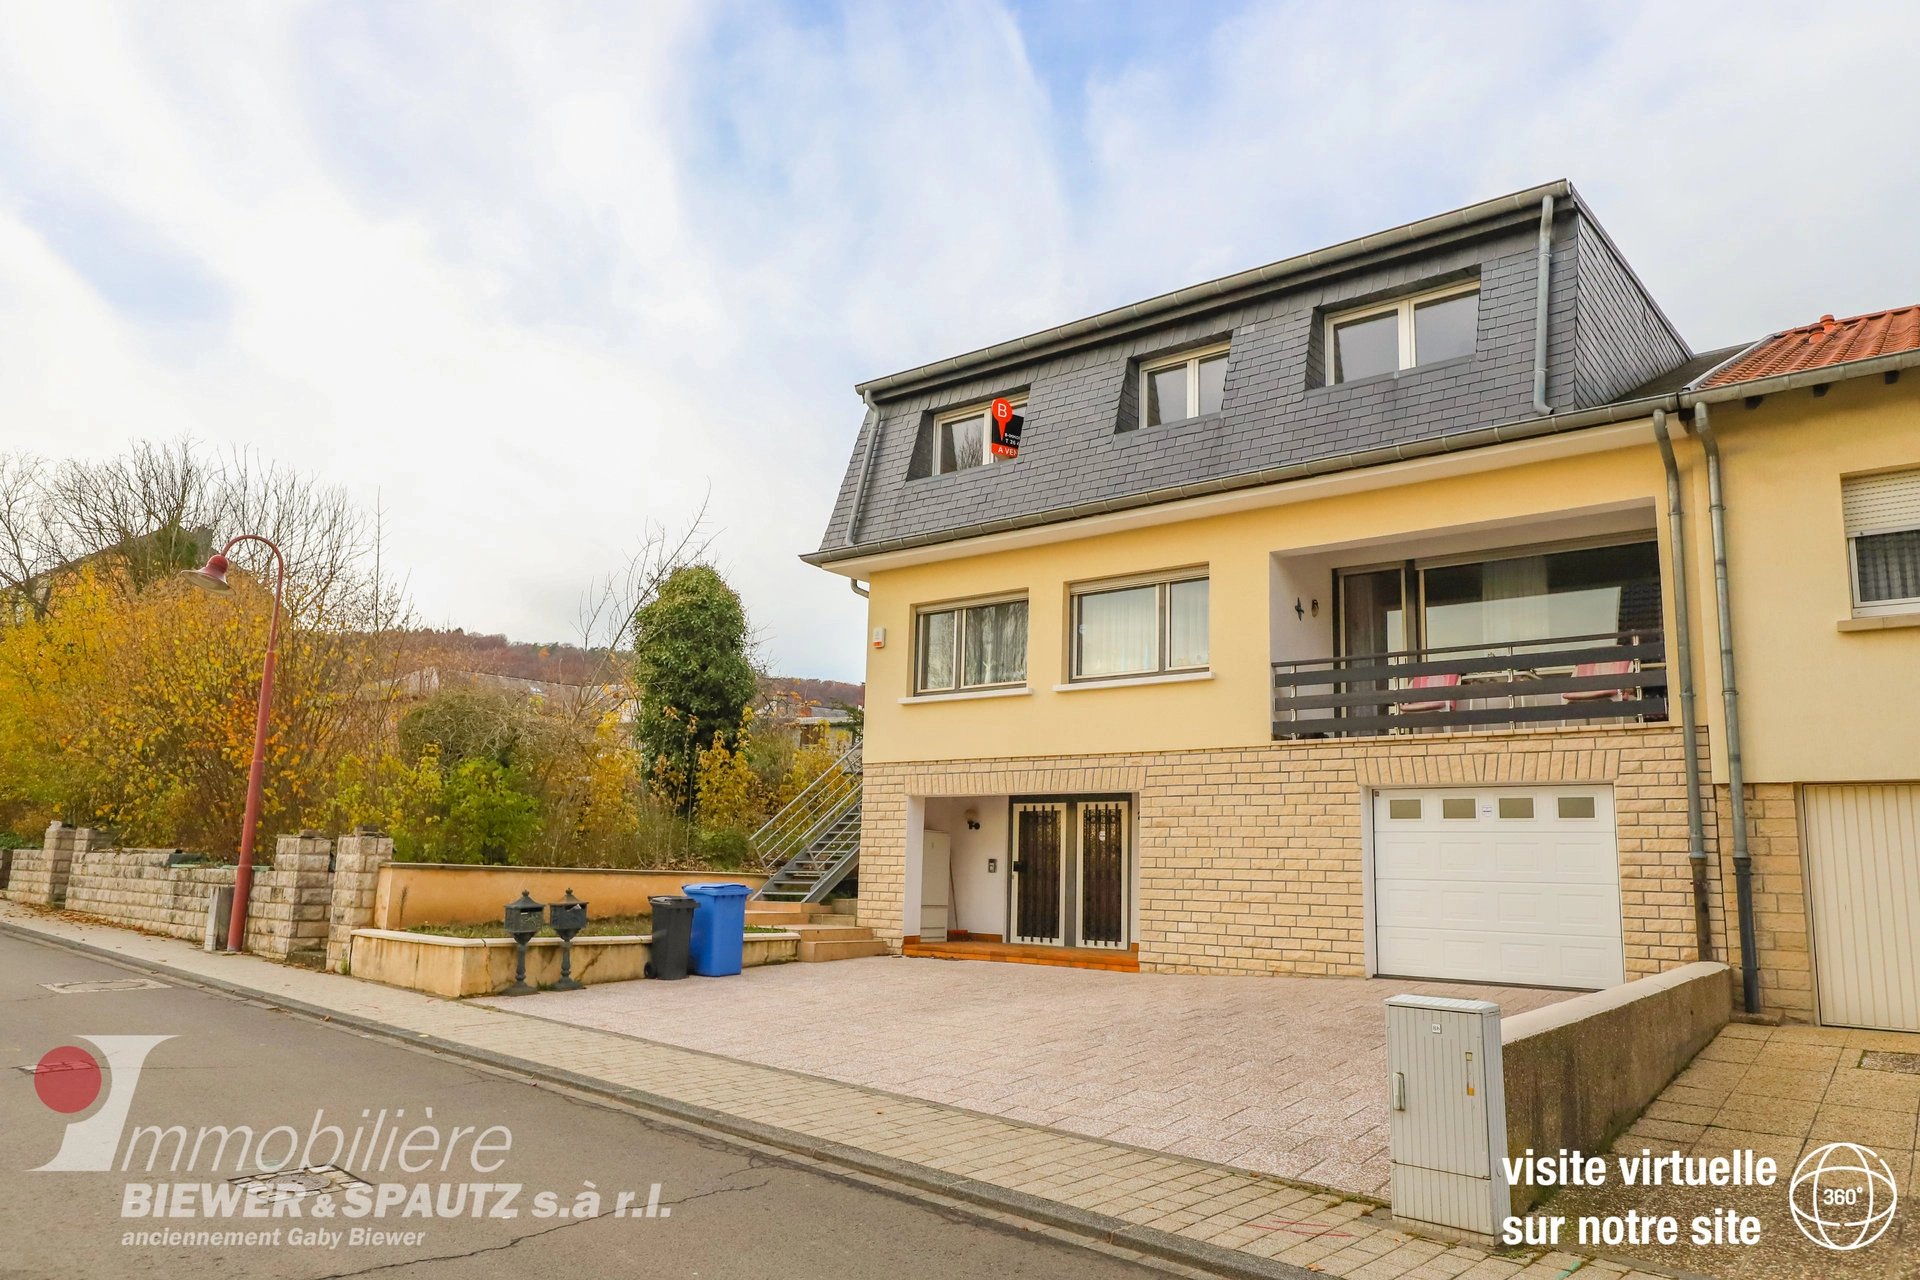 SOLD - duplex with 3 bedrooms in Mullendorf/Steinsel